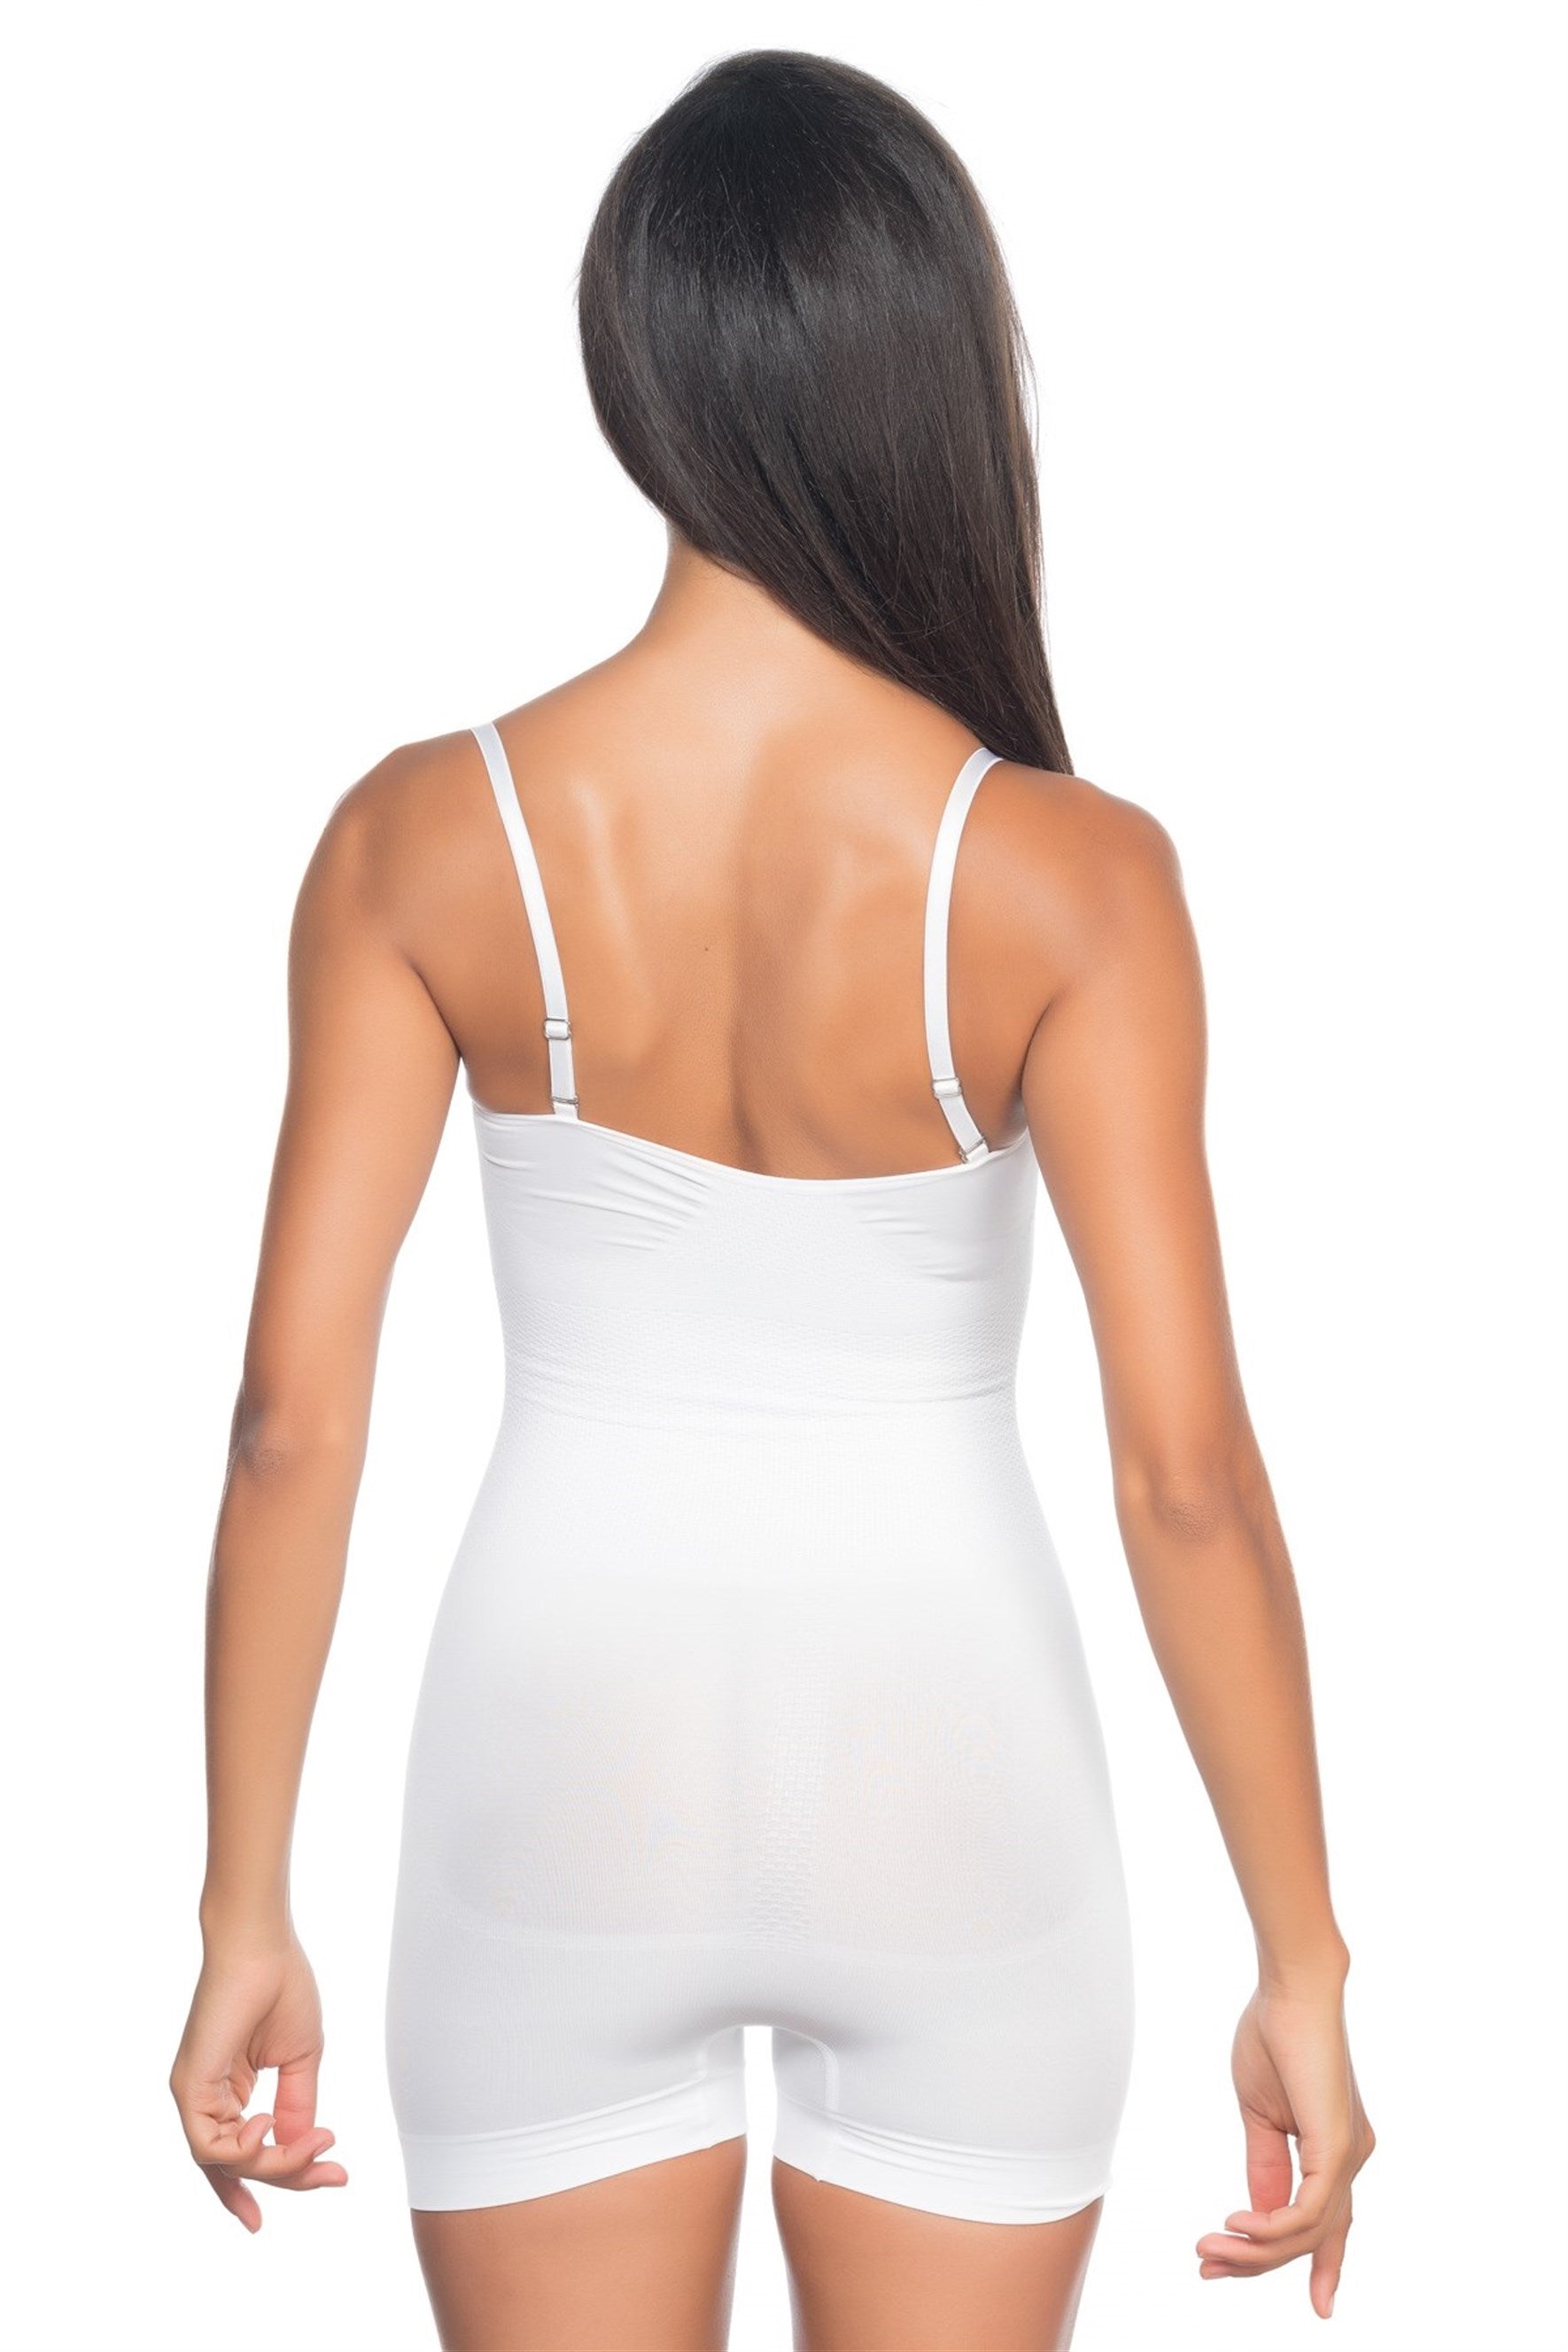 Shopymommy 2059 Postpartum Corset With Massage Feature